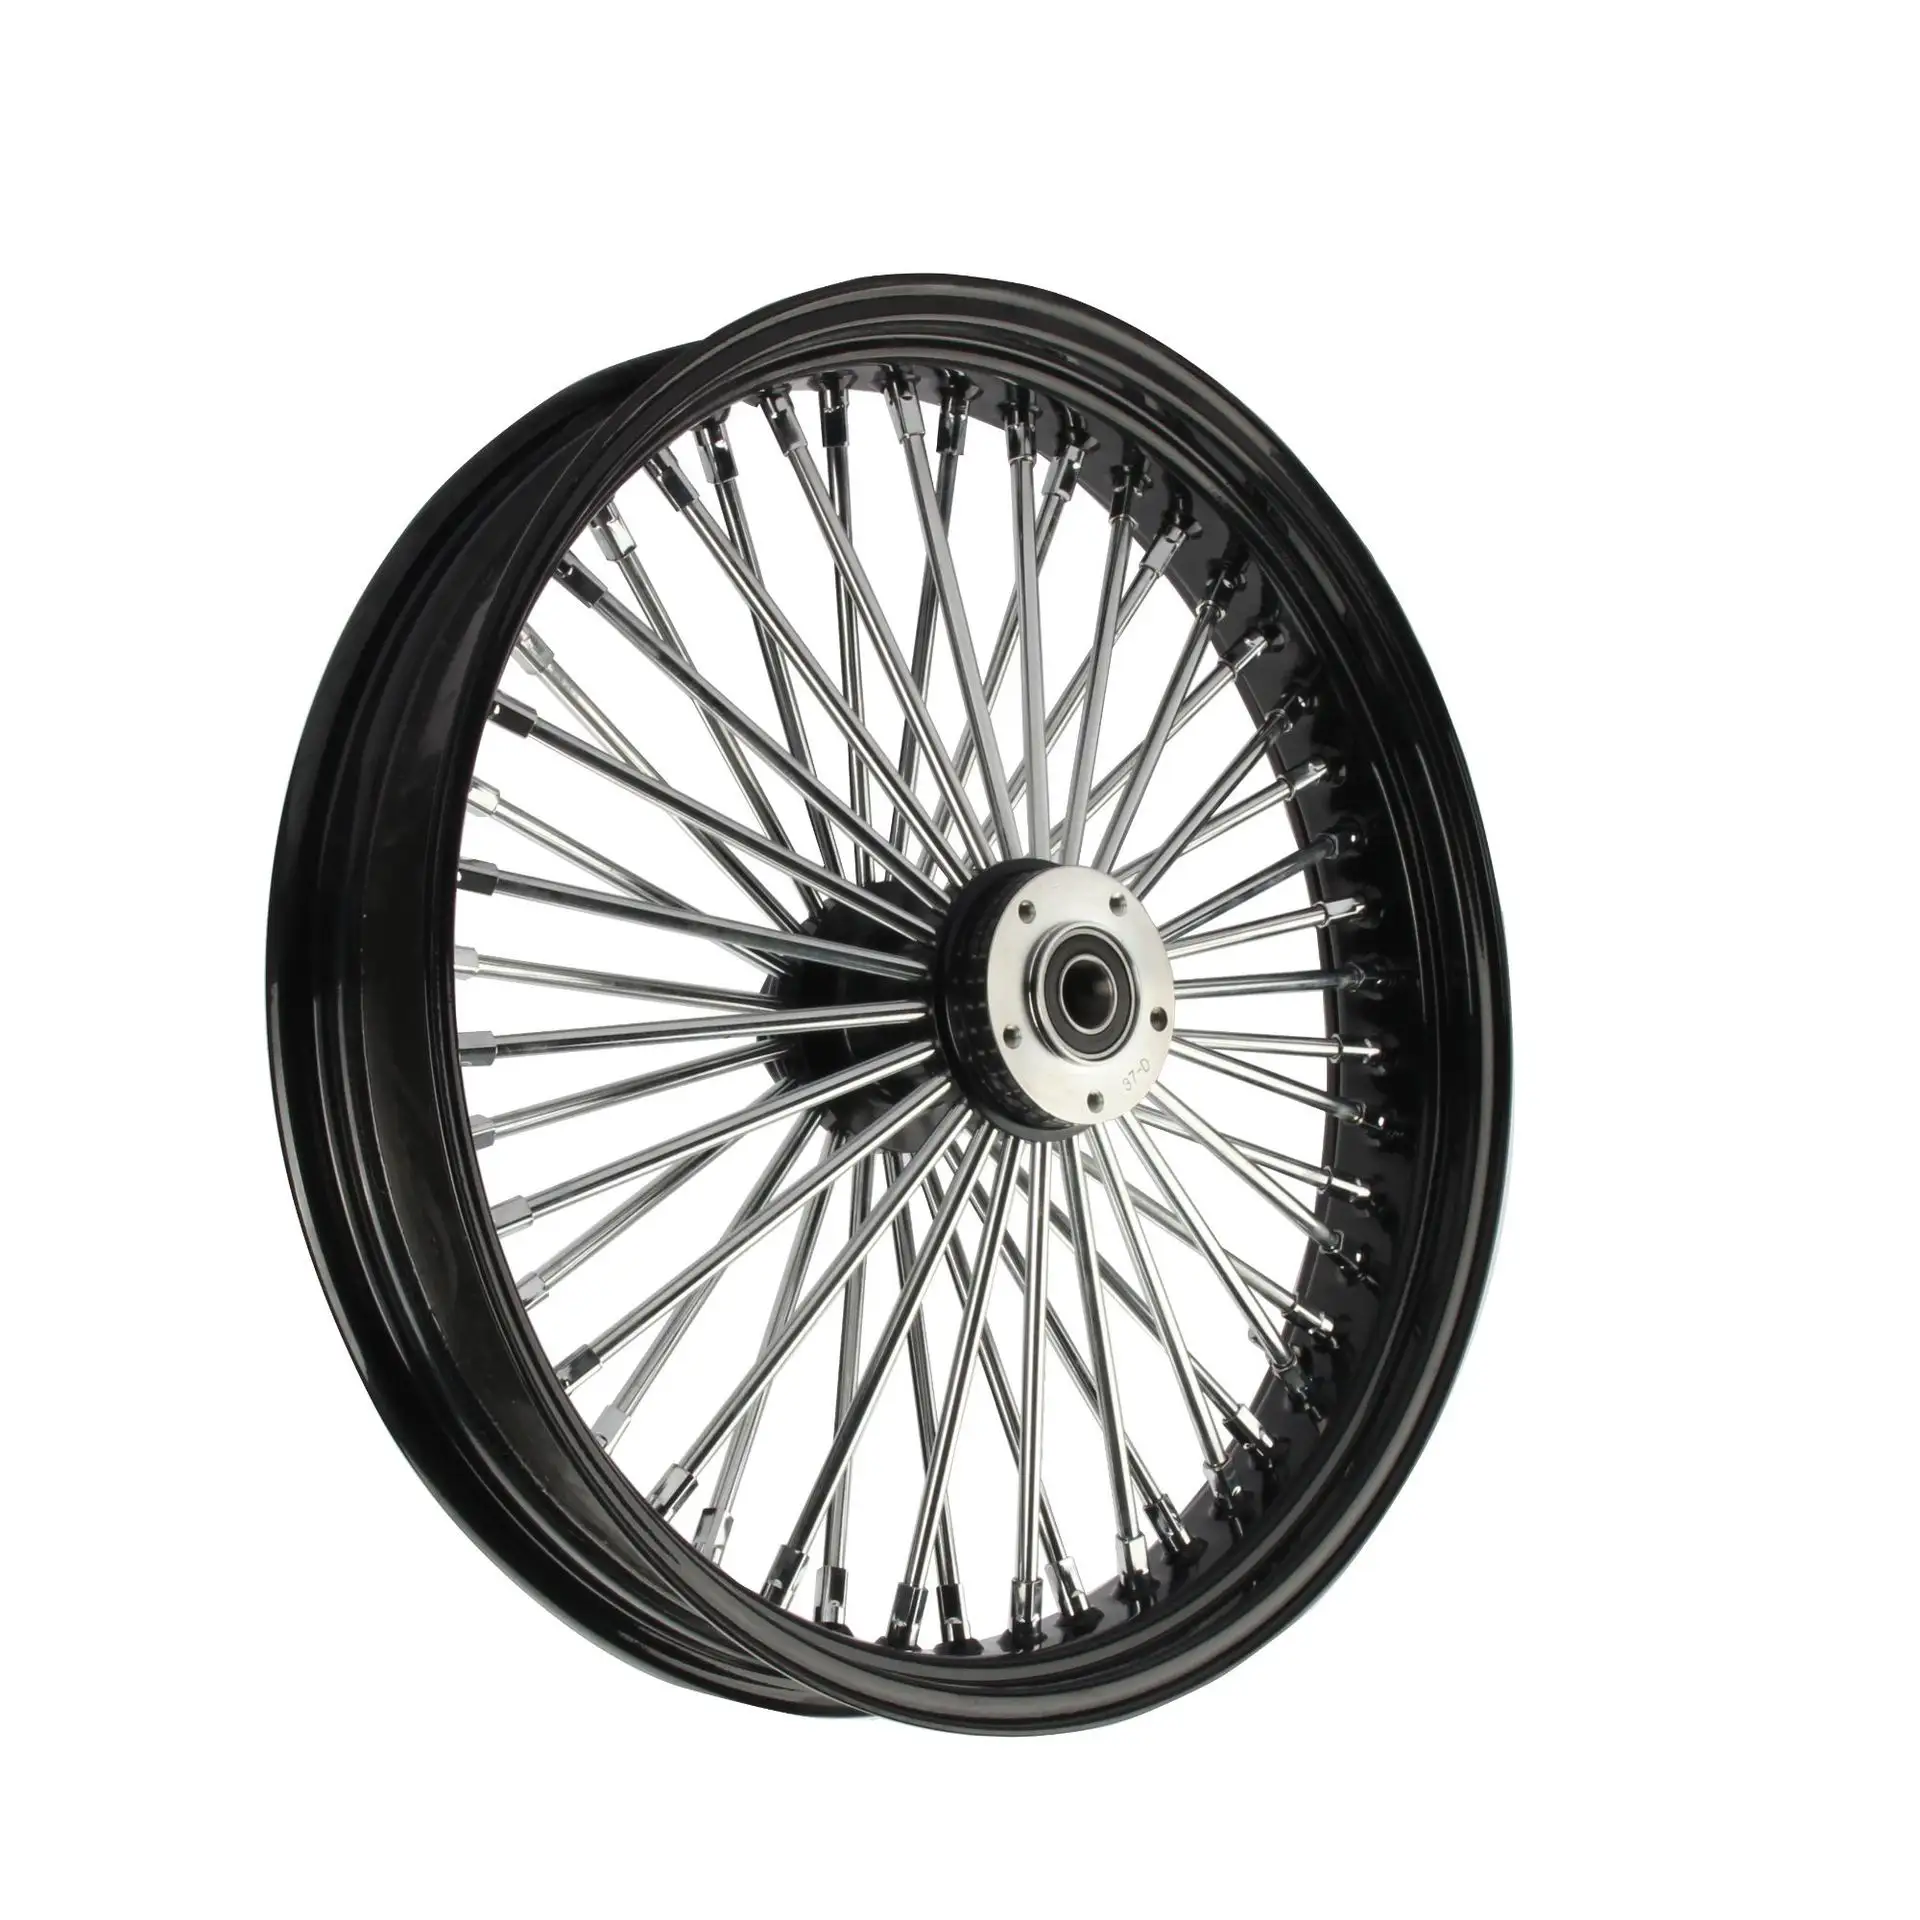 Harley Custom 21-inch Spoked Wheel with 48 Thick Spokes Electroplated Spoked Rim suitable for modification of older Harley model